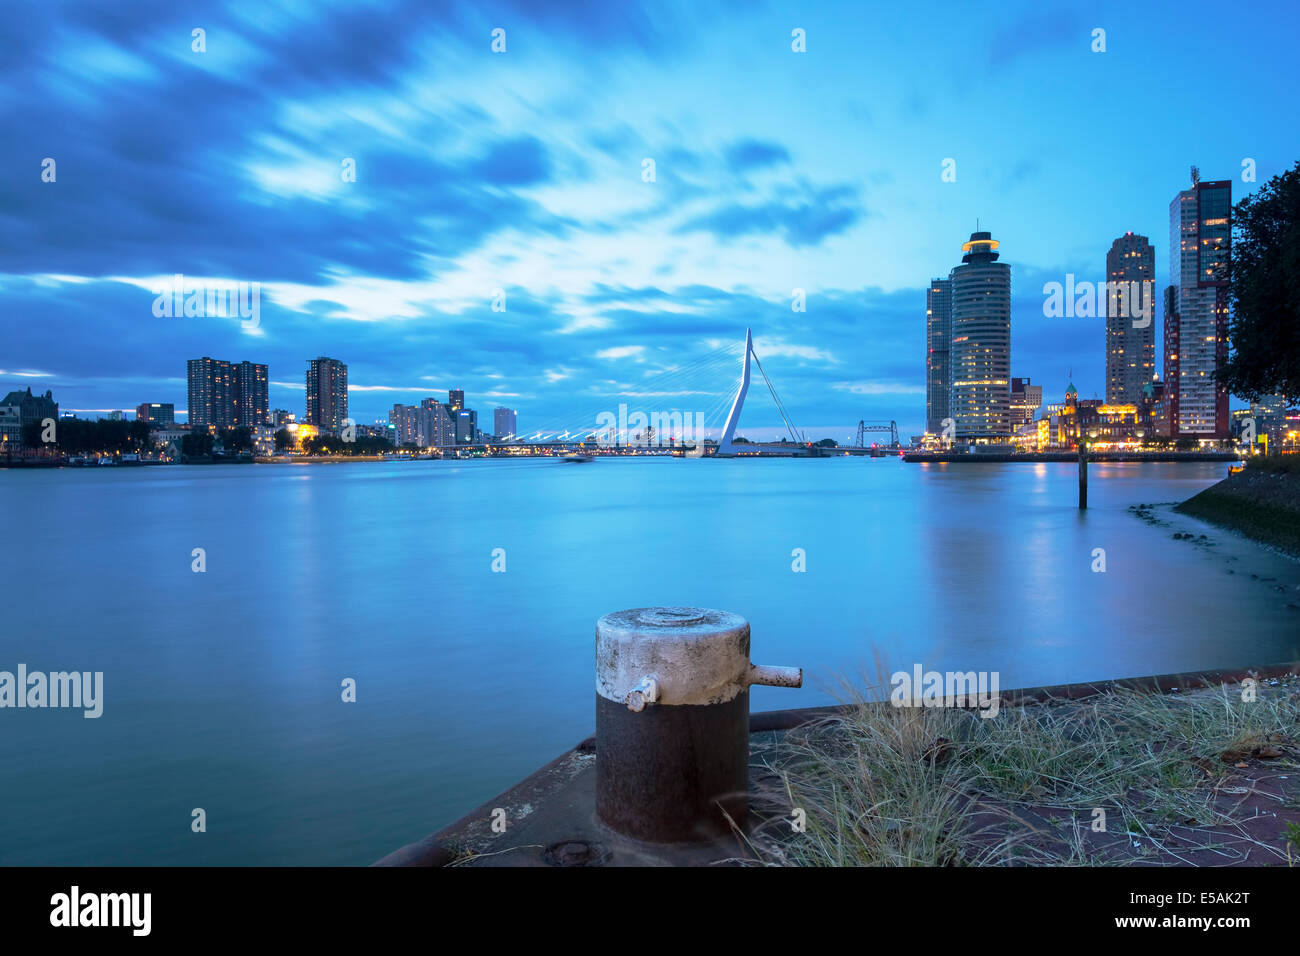 Rotterdam skyline during the blue hour, long exposure. Stock Photo